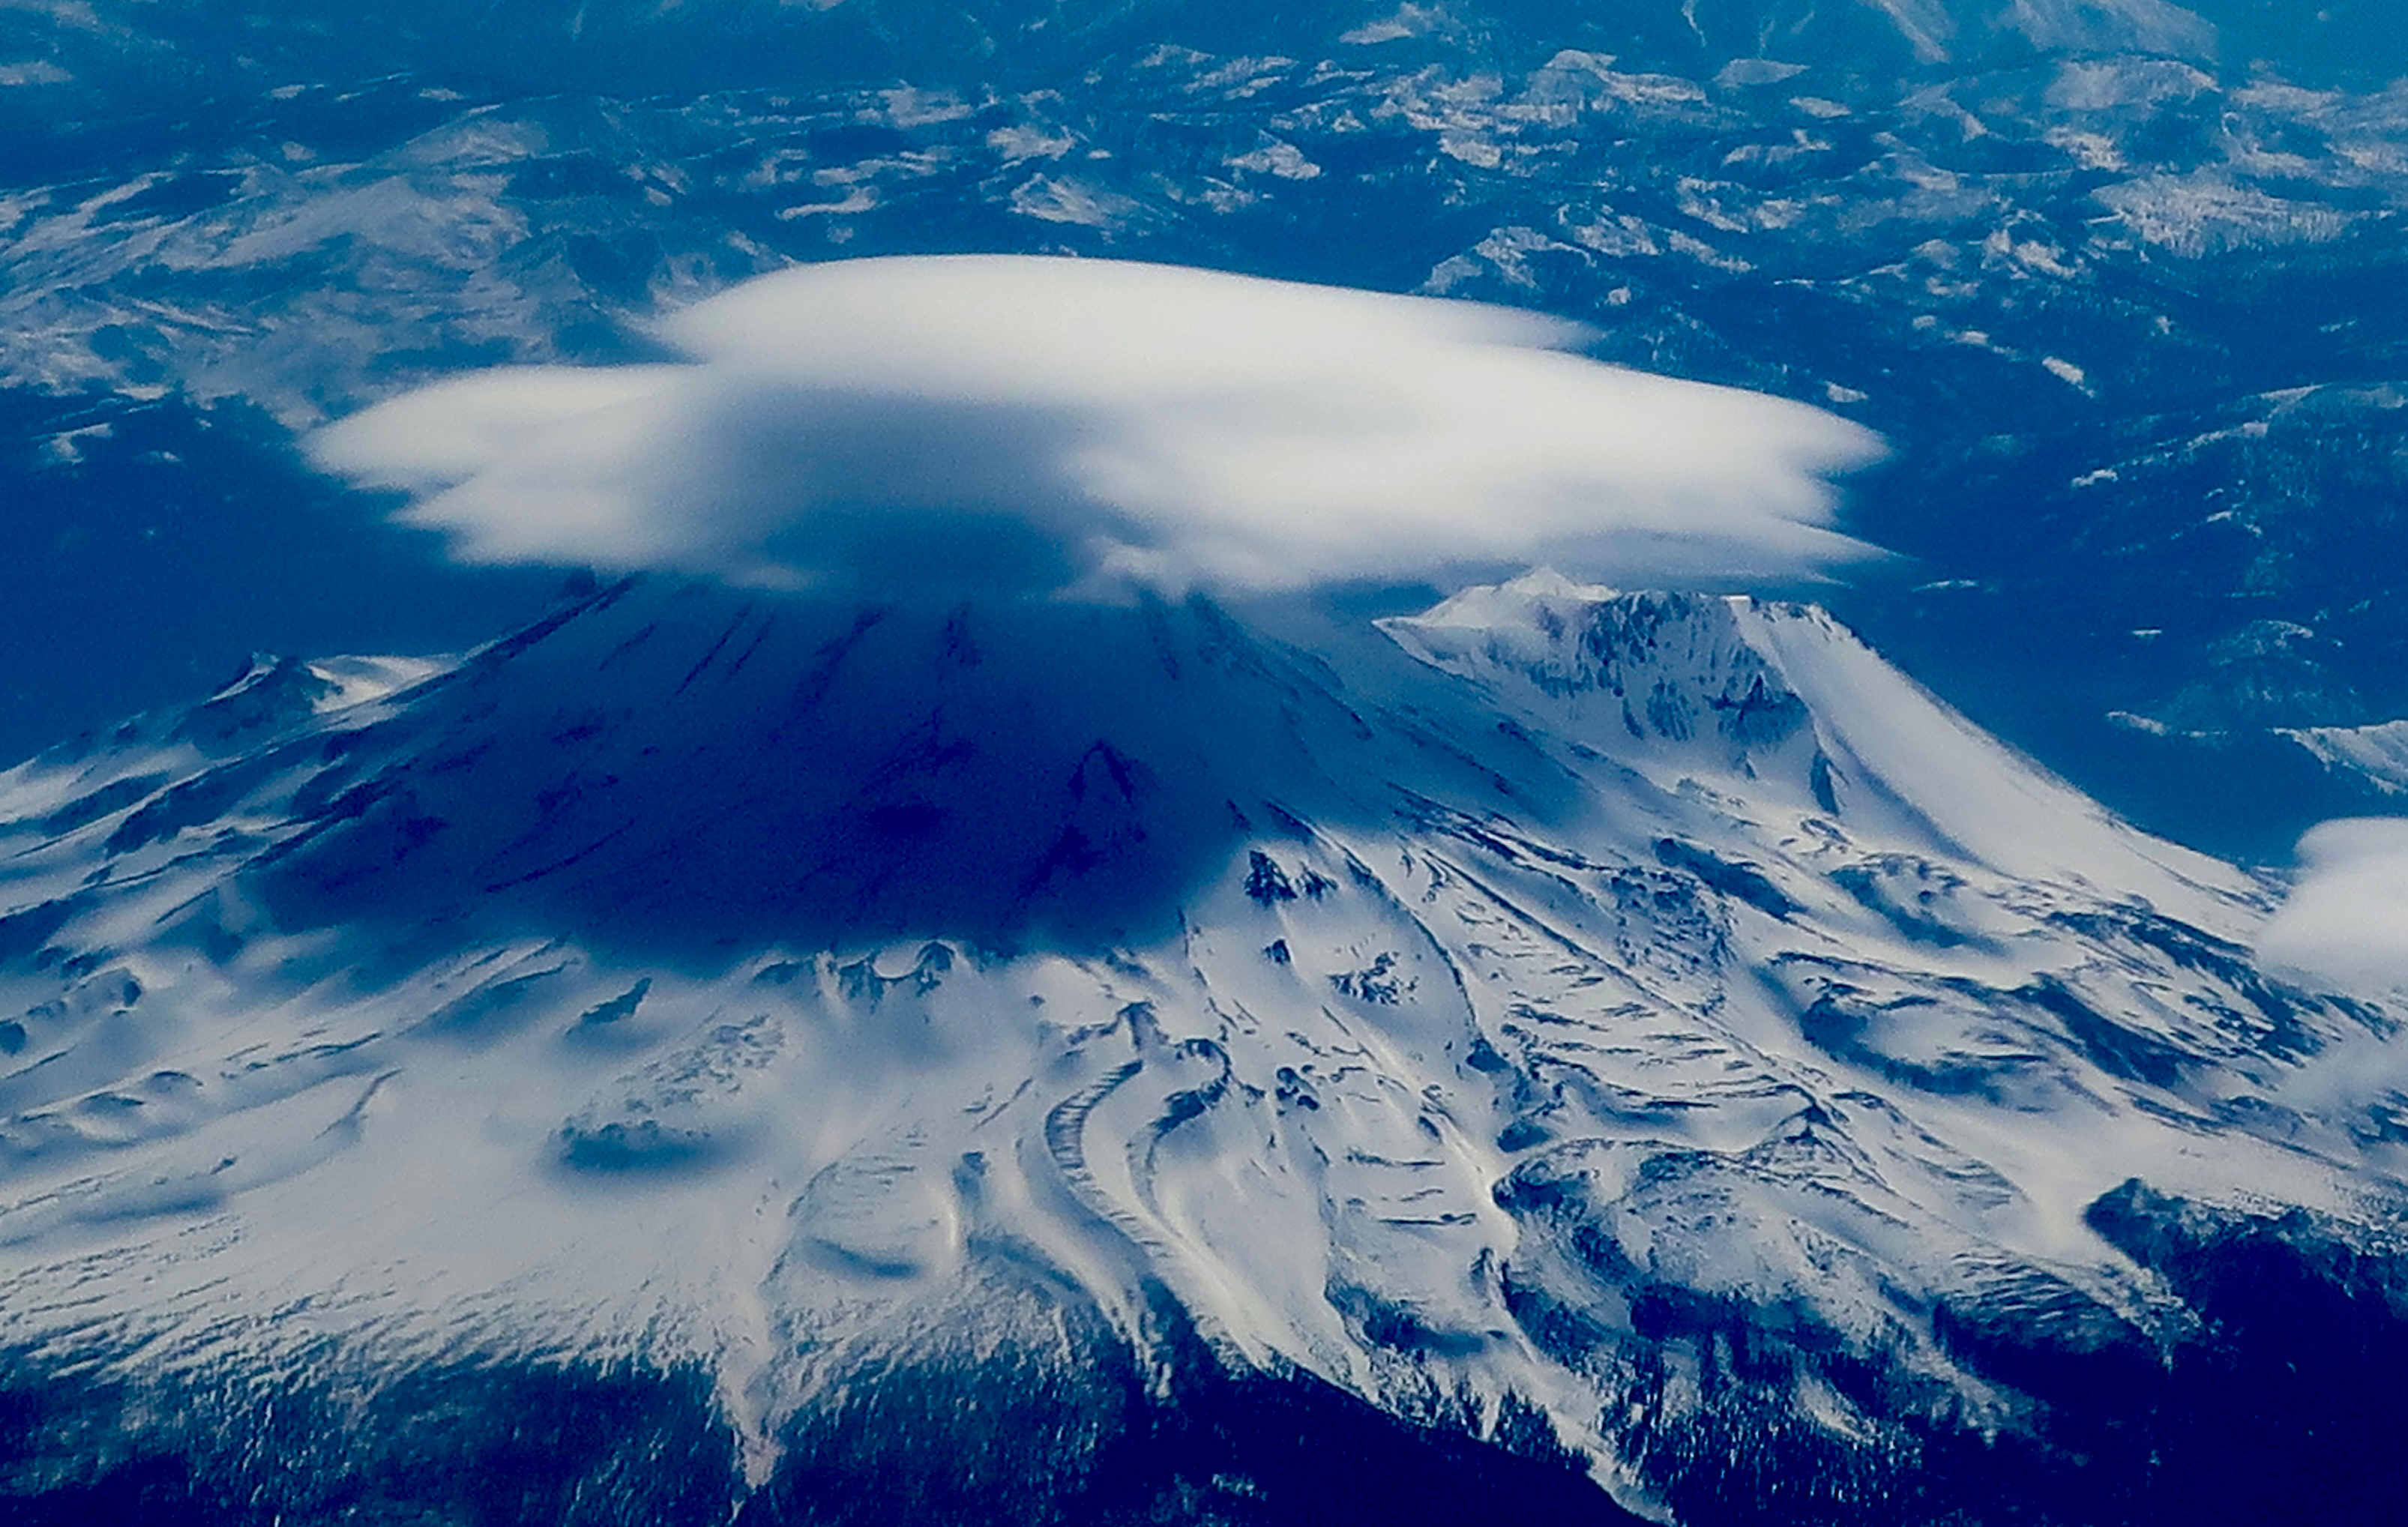 Airplane photo of lenticular cloud over Mt. Shasta on April 10, 2023 by photographer Curt Mekemson.